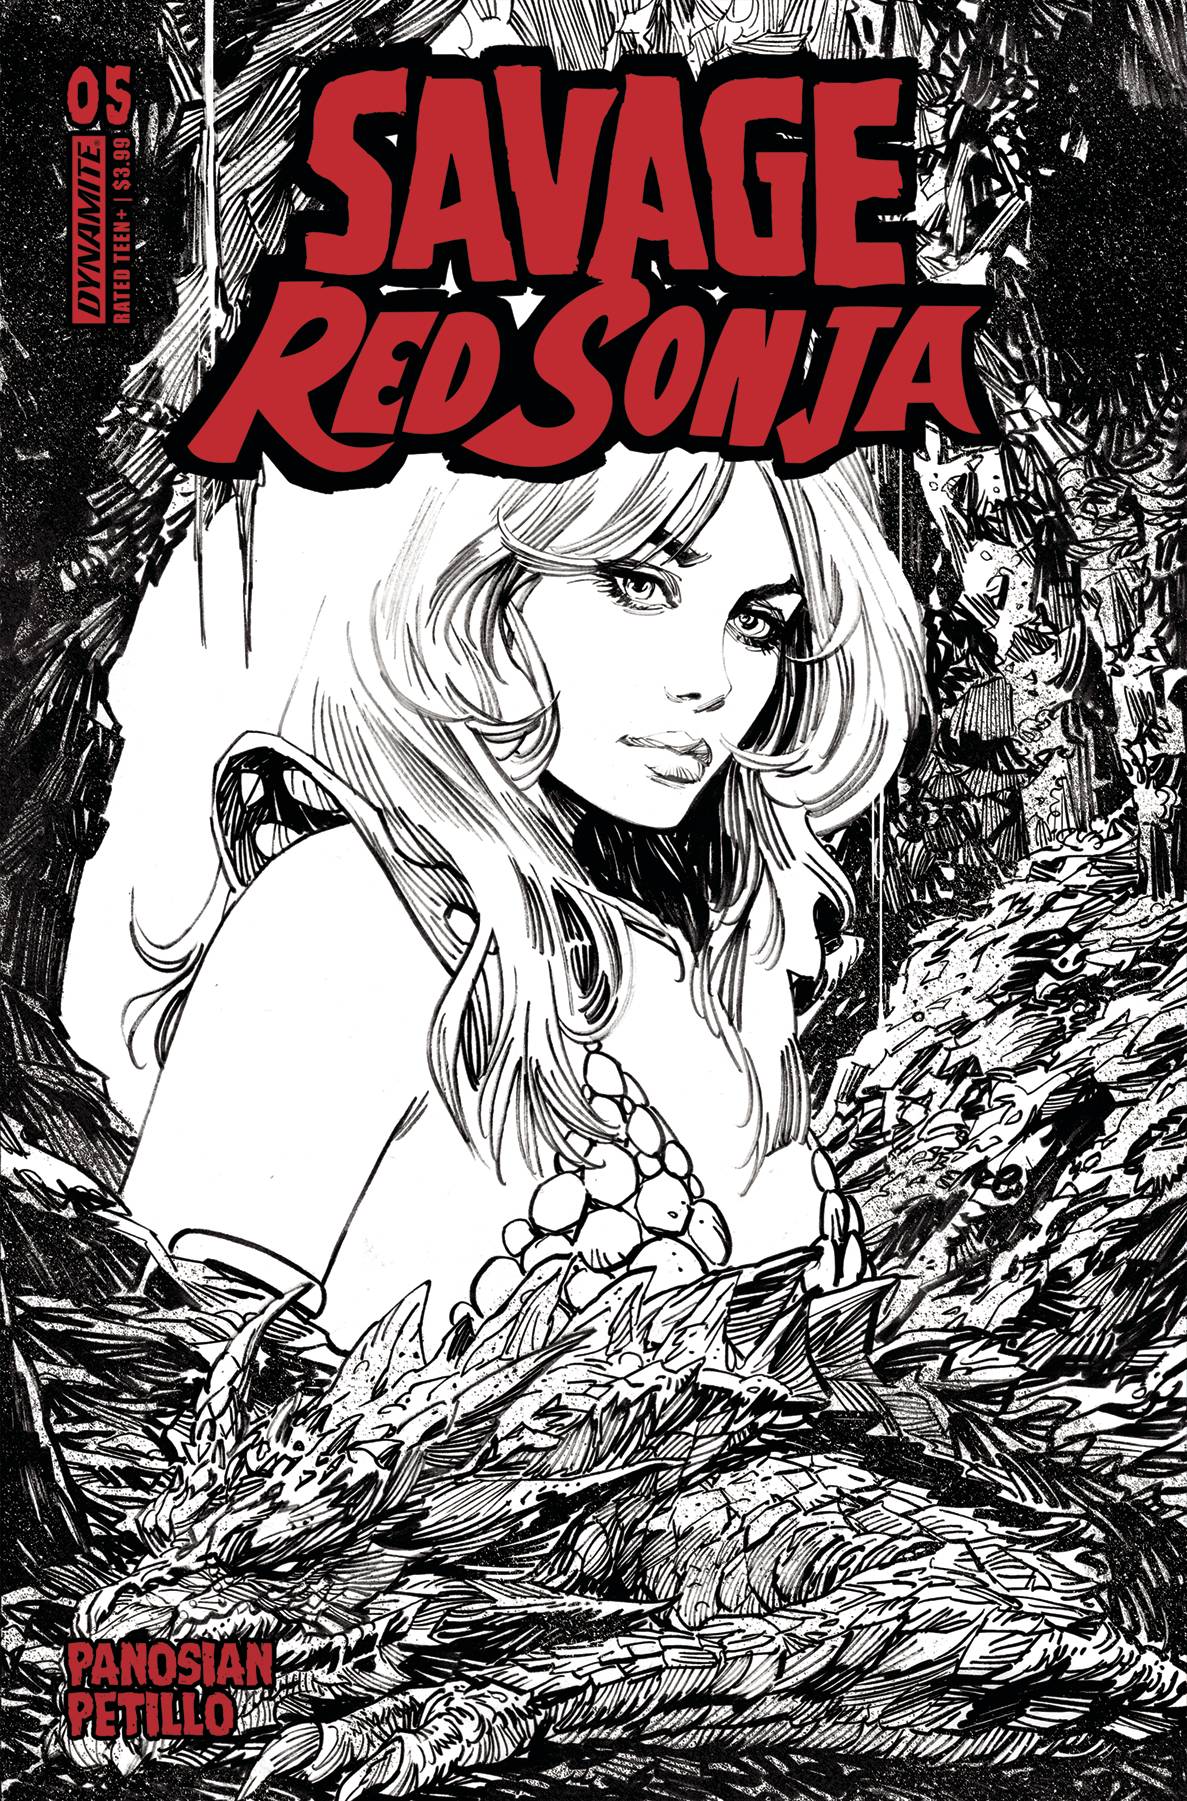 Savage Red Sonja #5 Cover E 1 for 10 Incentive Panosian Line Art